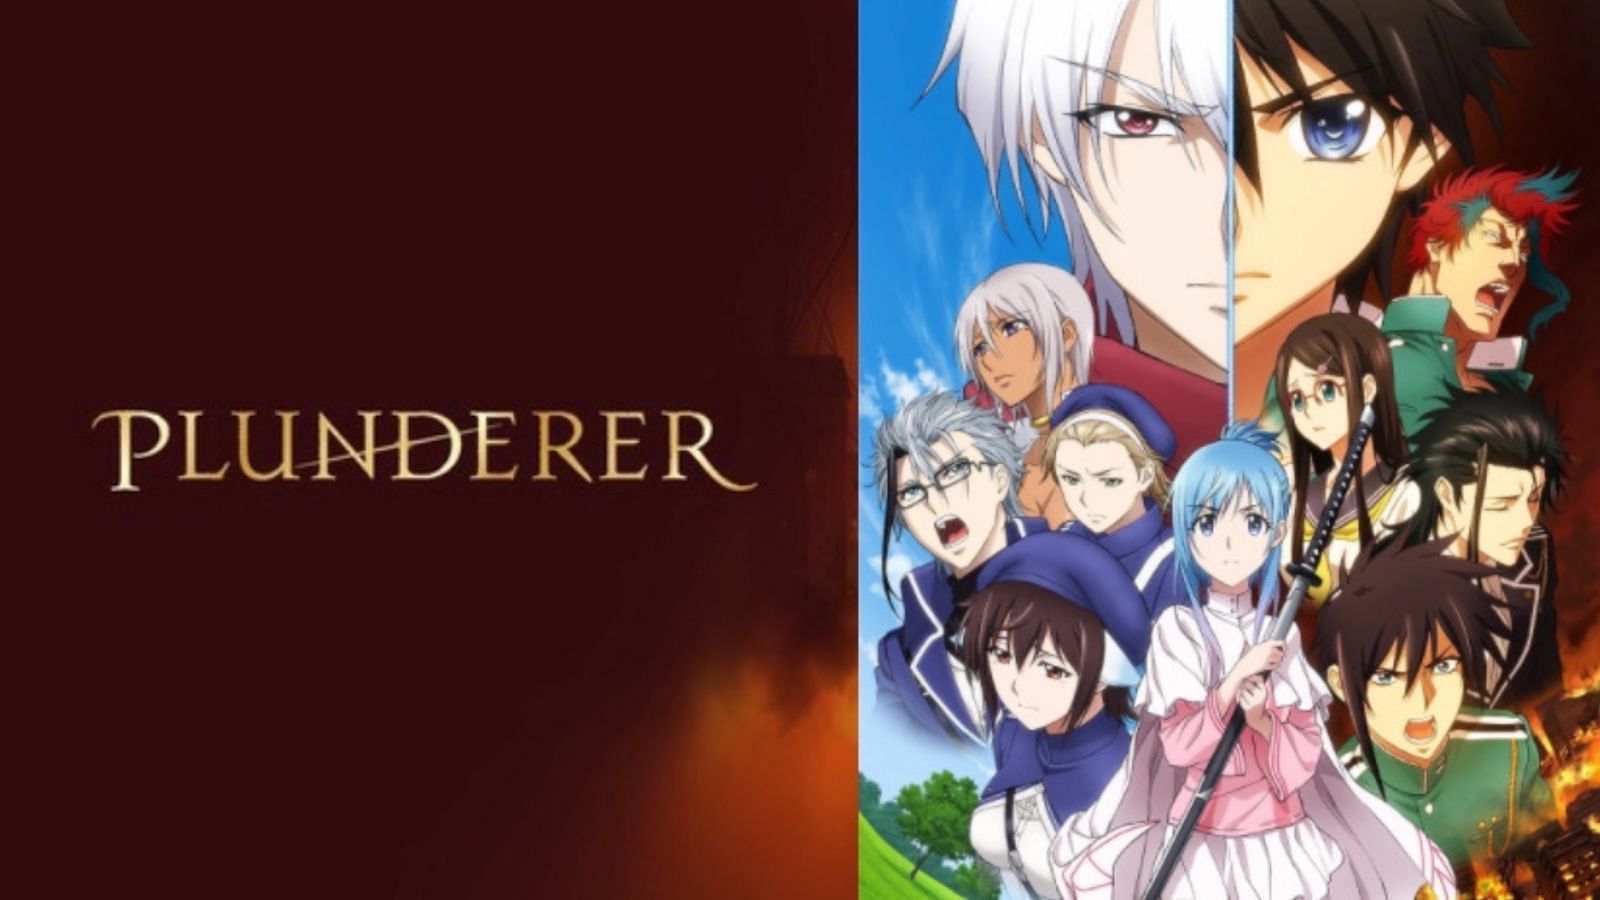 How many seasons does plunderer have